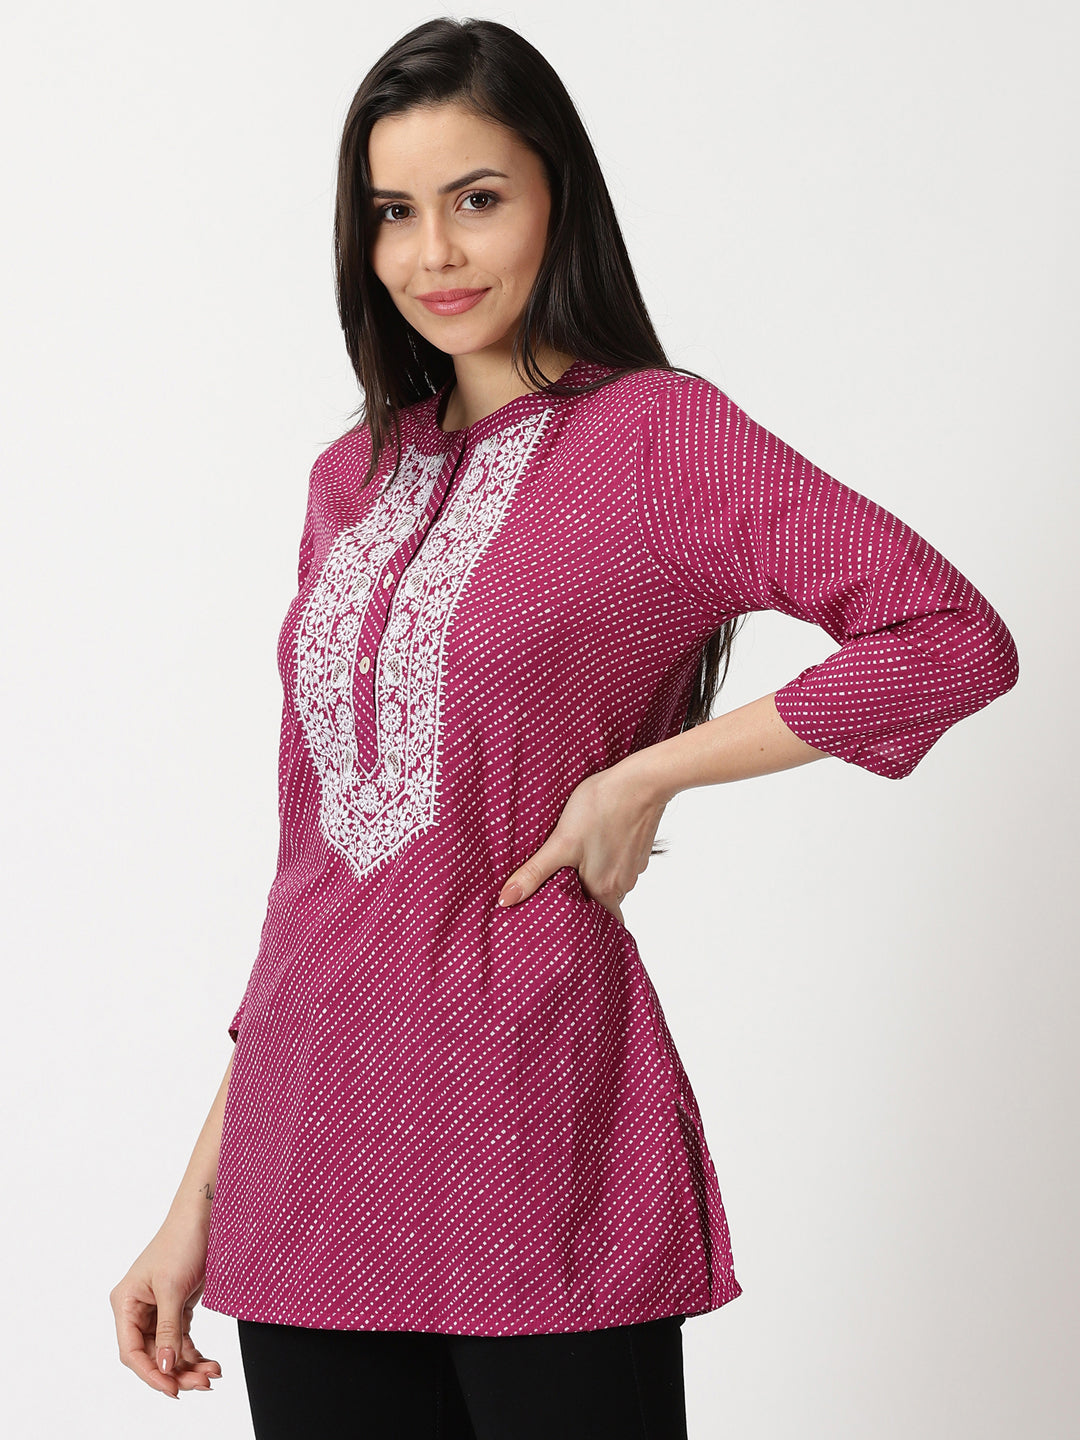 Cotton Straight College Girl Kurtis at Rs 348 in Chennai | ID: 8486836712